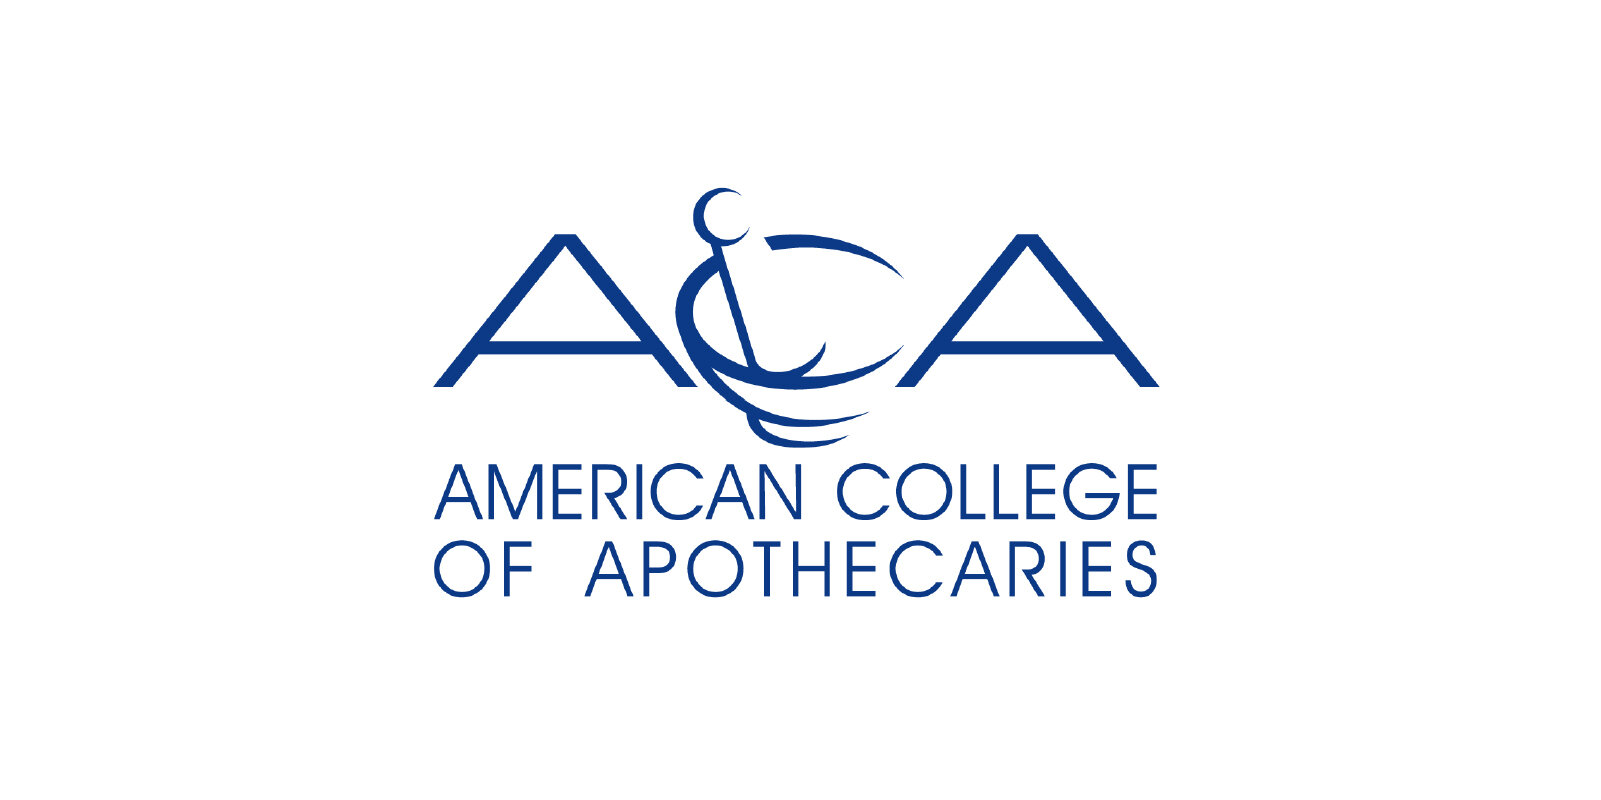 prescription-compounding-for-human-and-veterinary-clients-florence-sc-american-college-of-apothecaries-icon.jpg